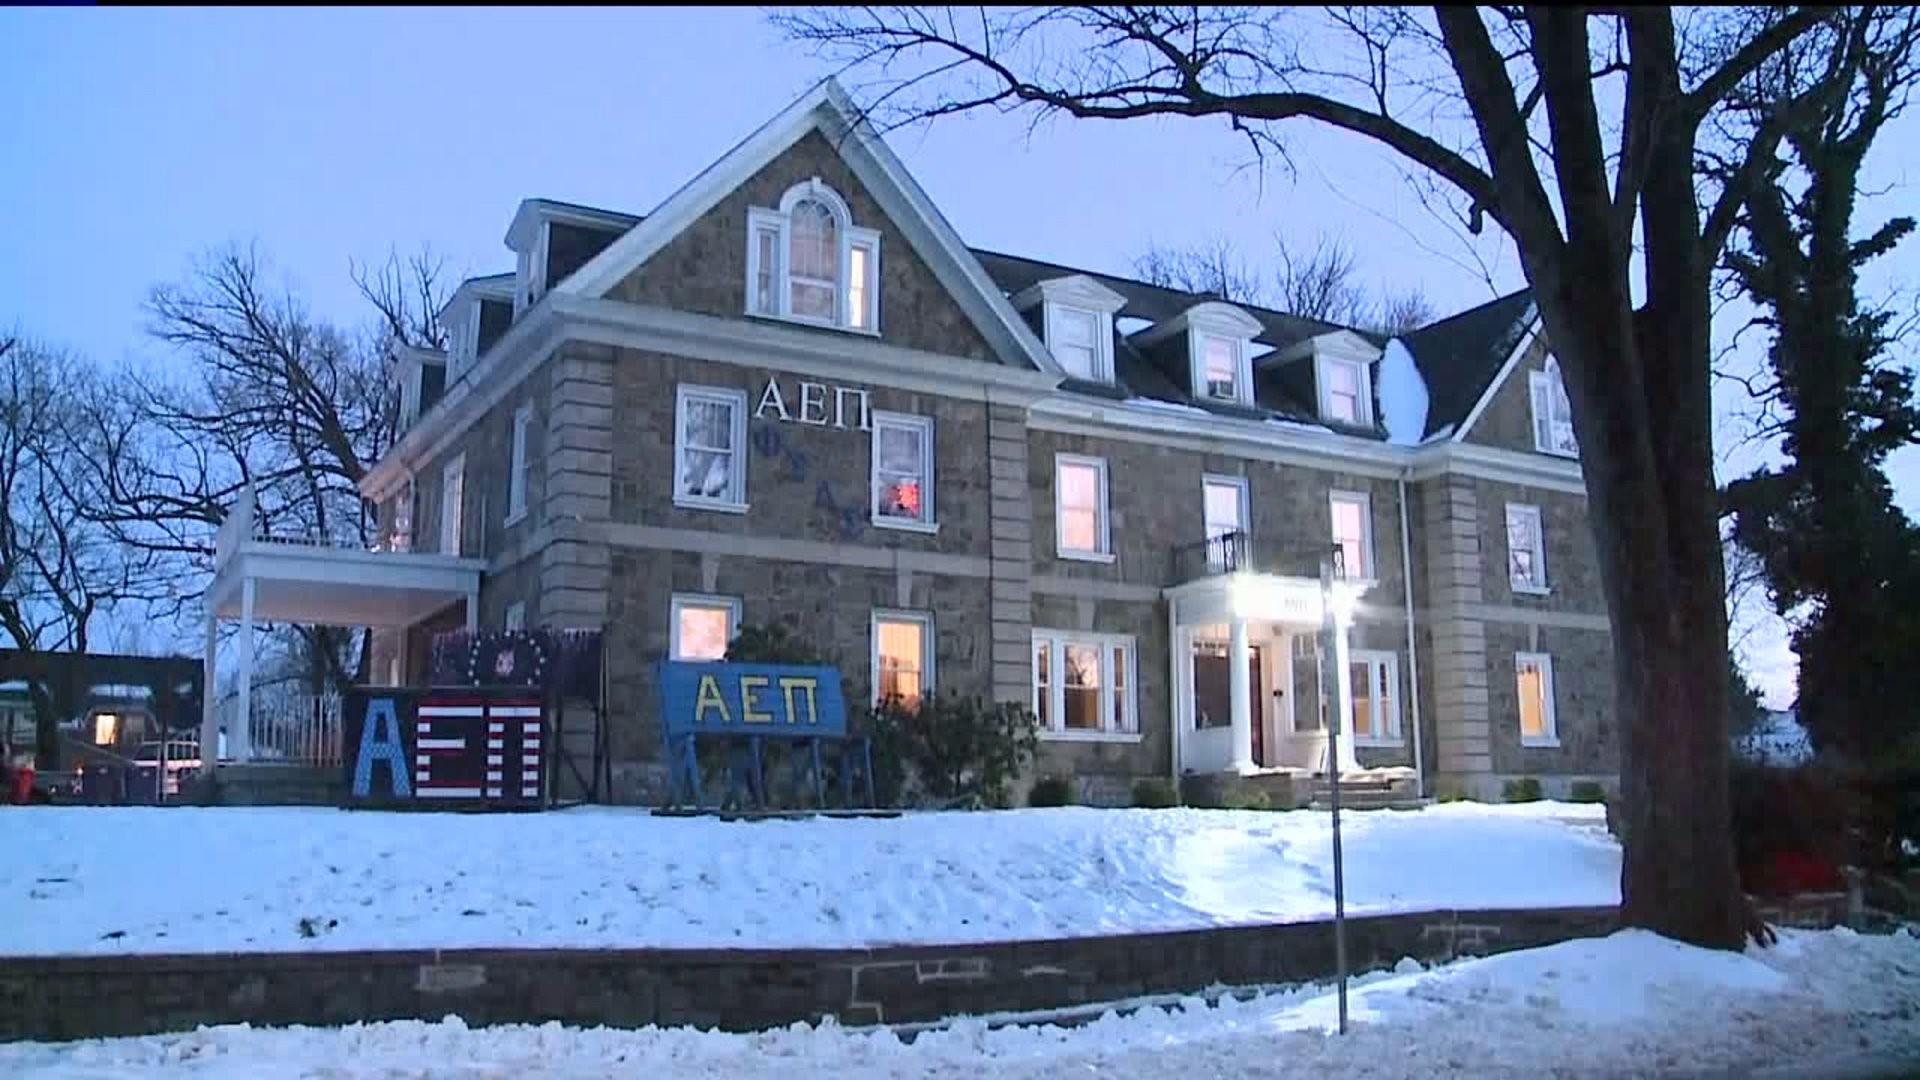 Penn State University Frat Suspended Amid Reported Sexual Assault